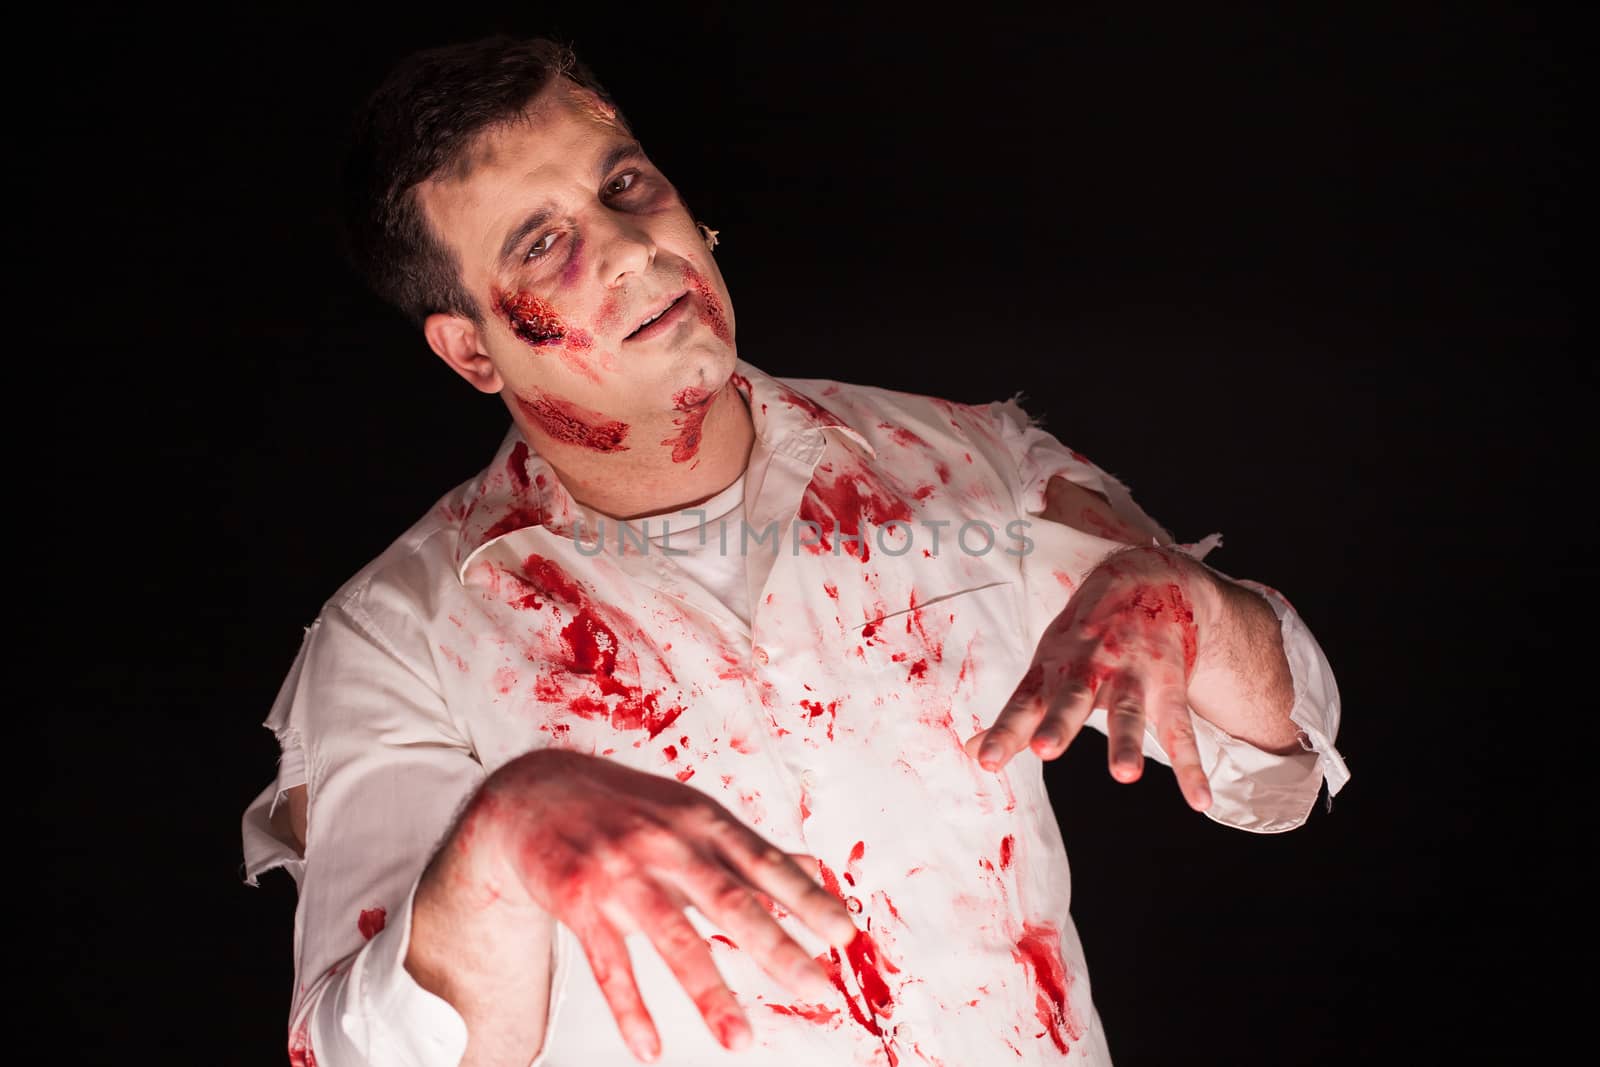 Violent zombie with bloody creative make up over black background. Dead man.